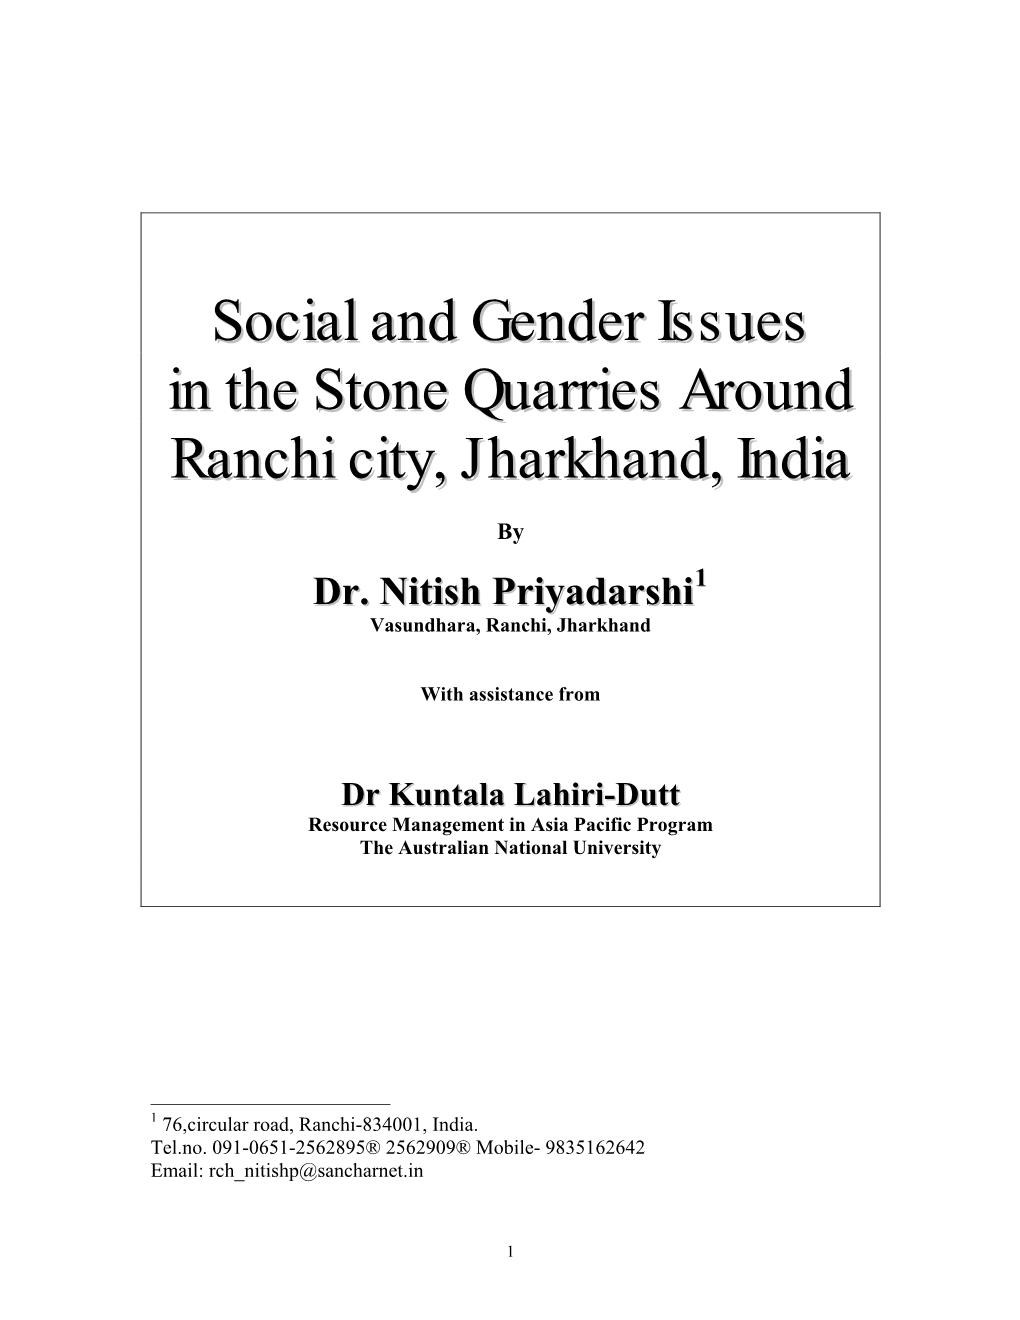 Social and Gender Issues in the Stone Quarries Around Ranchi City